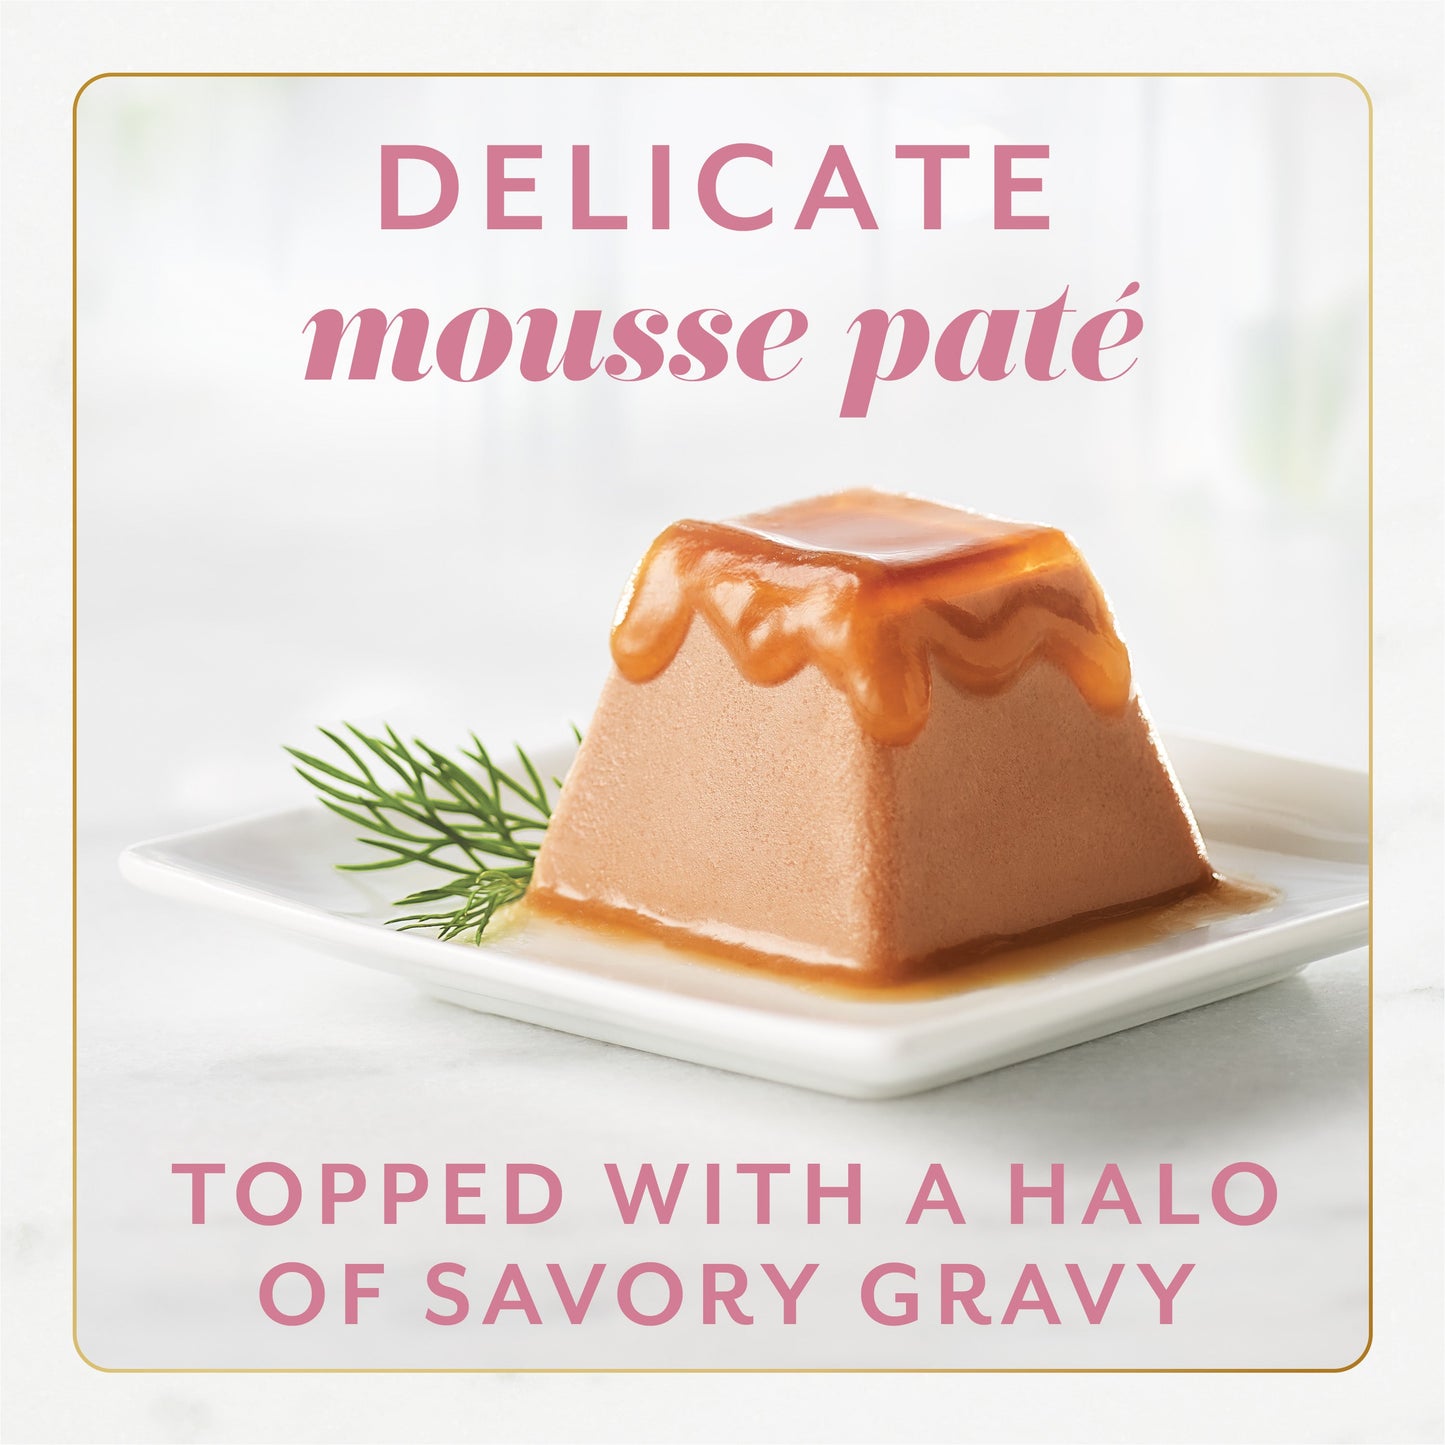 Fancy Feast Gems delicate salmon mousse pate topped with a halo of savory gravy